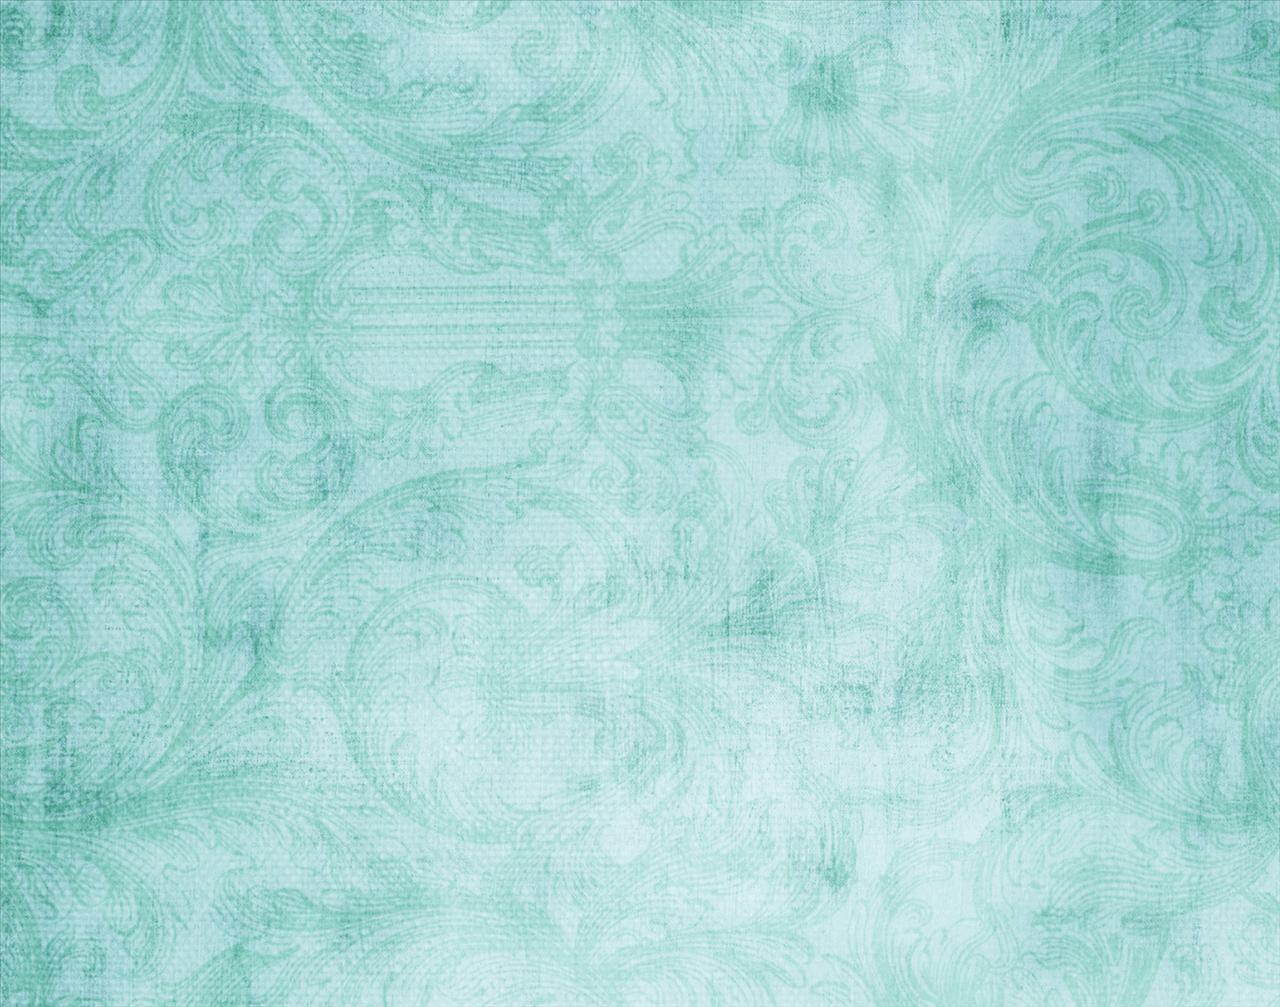 Turquoise Background Wallpaper Image